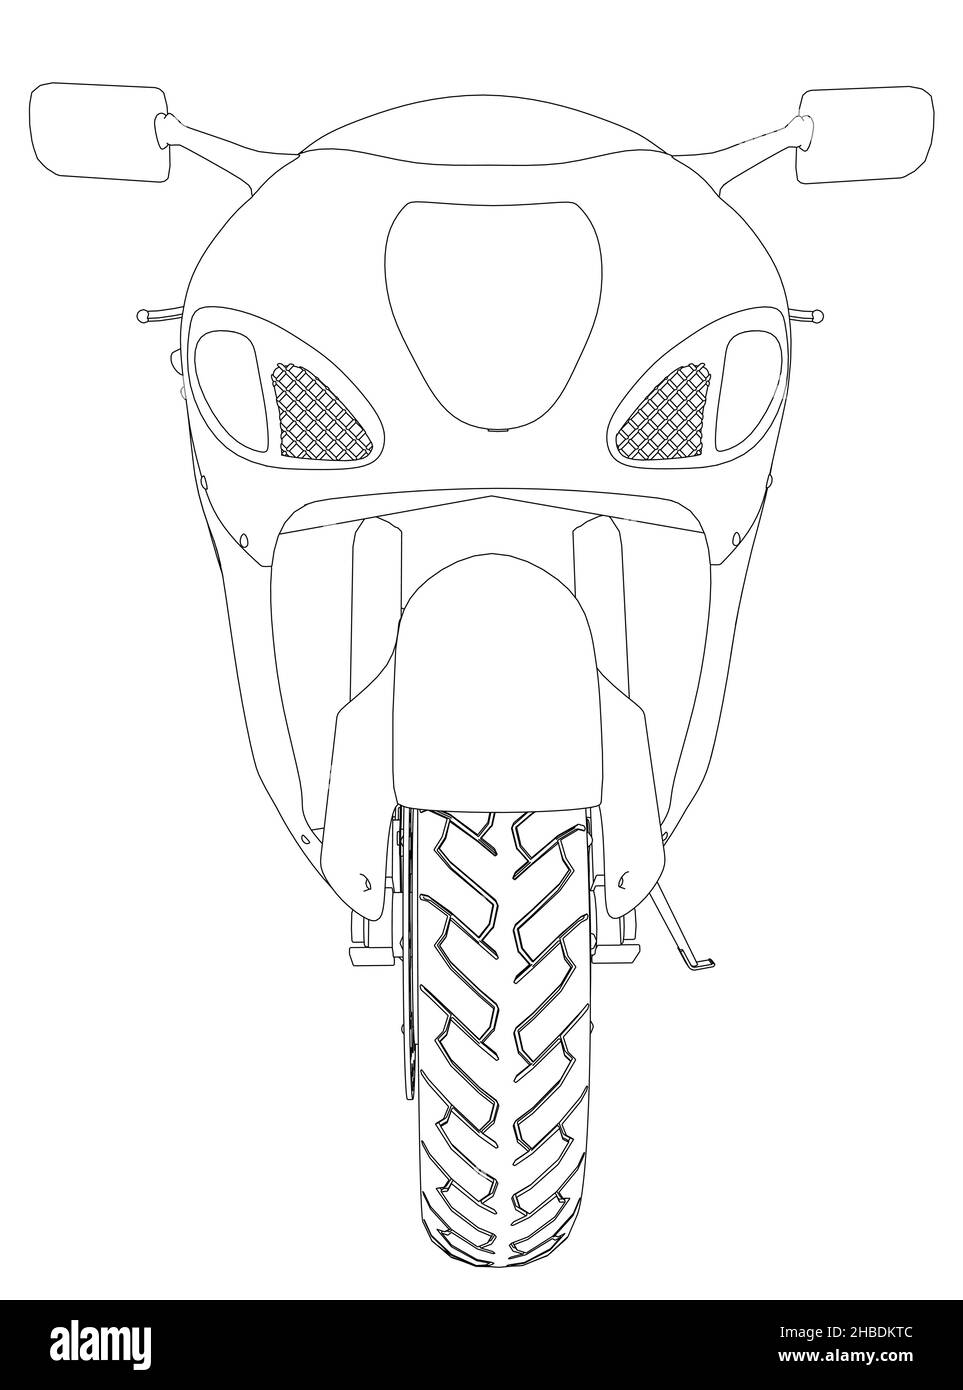 Looking for a Hayabusa sketch  General Bike Related Topics  Hayabusa  Owners Group